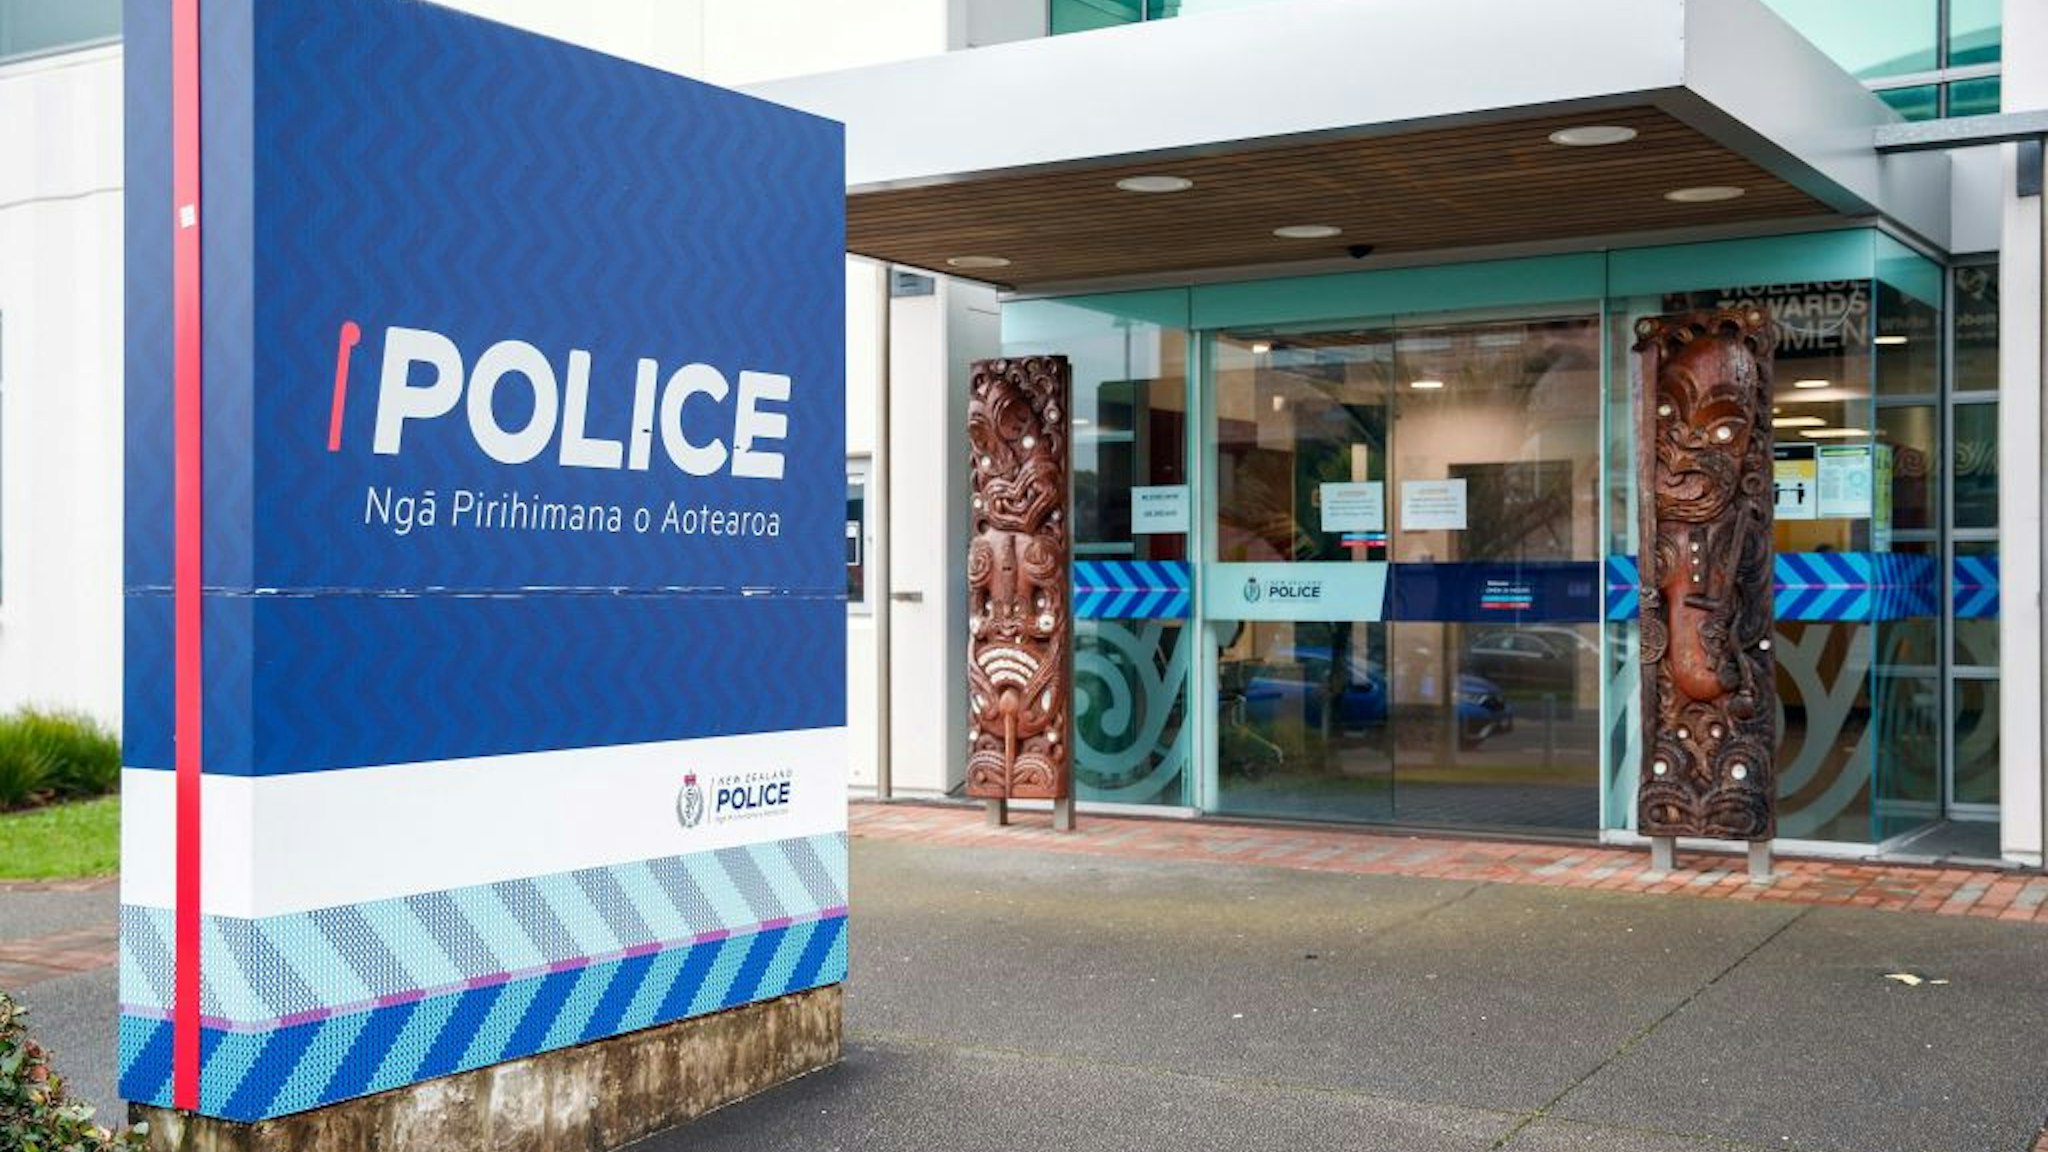 A general view shows the Counties Manukau police station that is leading an investigation after human remains were found in suitcases bought at an auction, in Auckland on August 19, 2022.